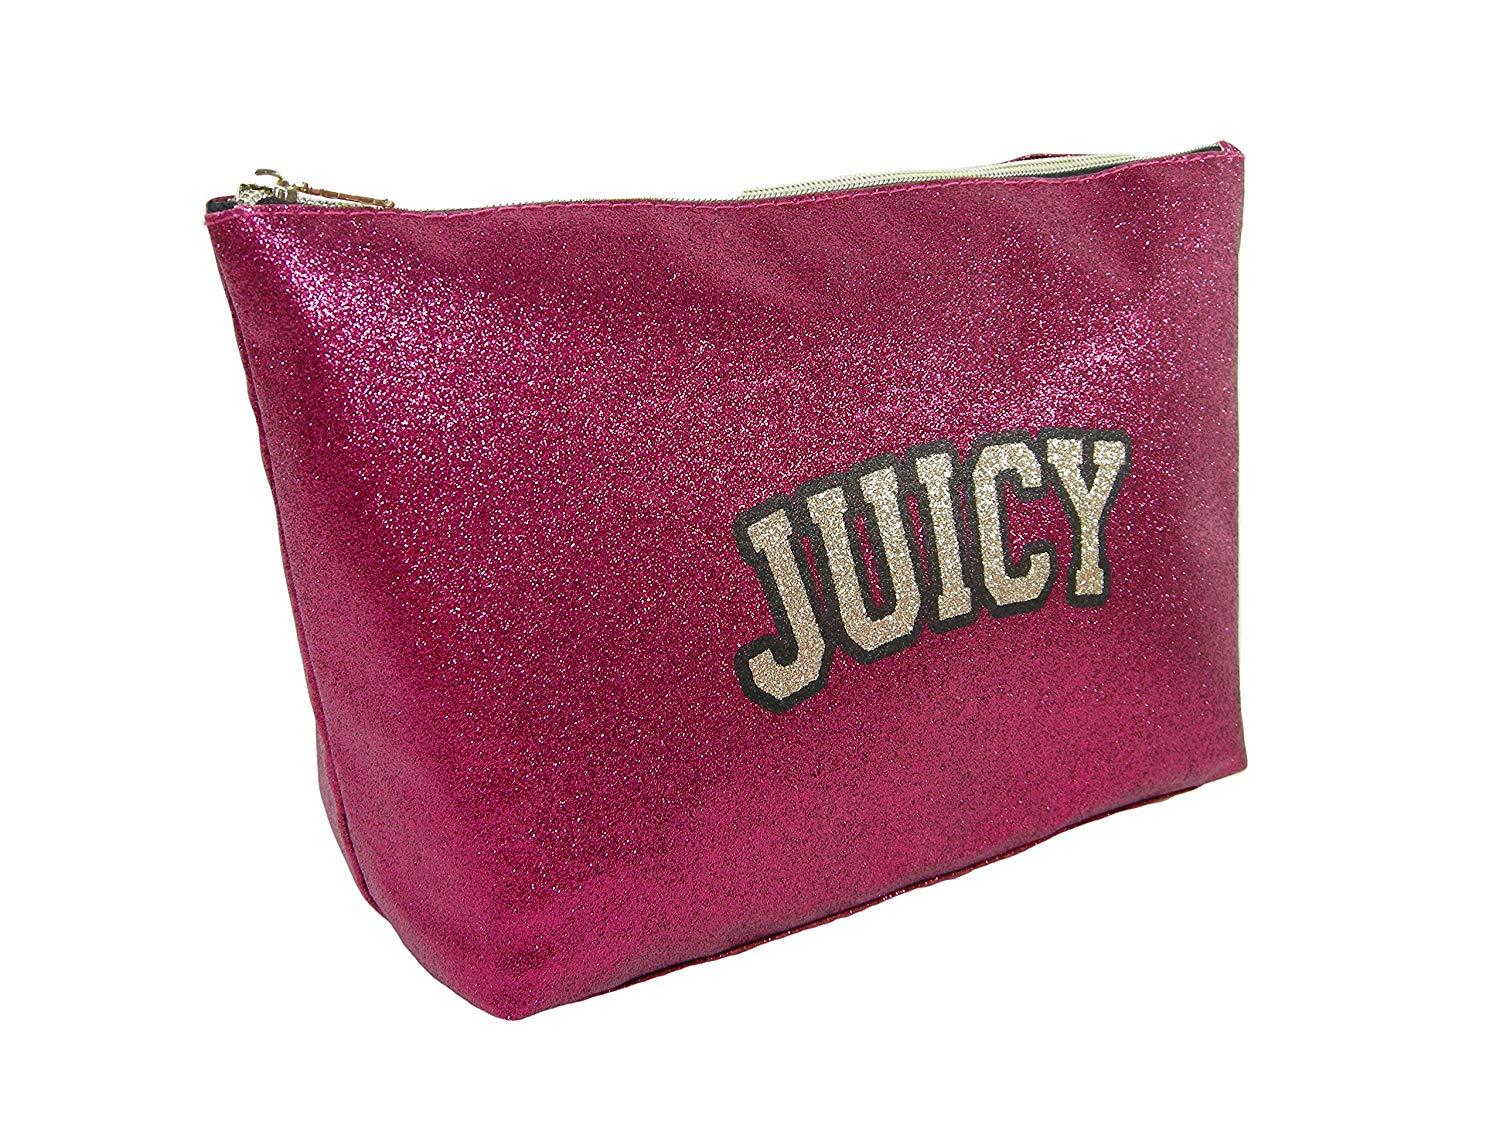 Pink Juicy Couture Logo - Amazon.com: New Juicy Couture Logo Cosmetics Pyramid Beauty Bag Make ...